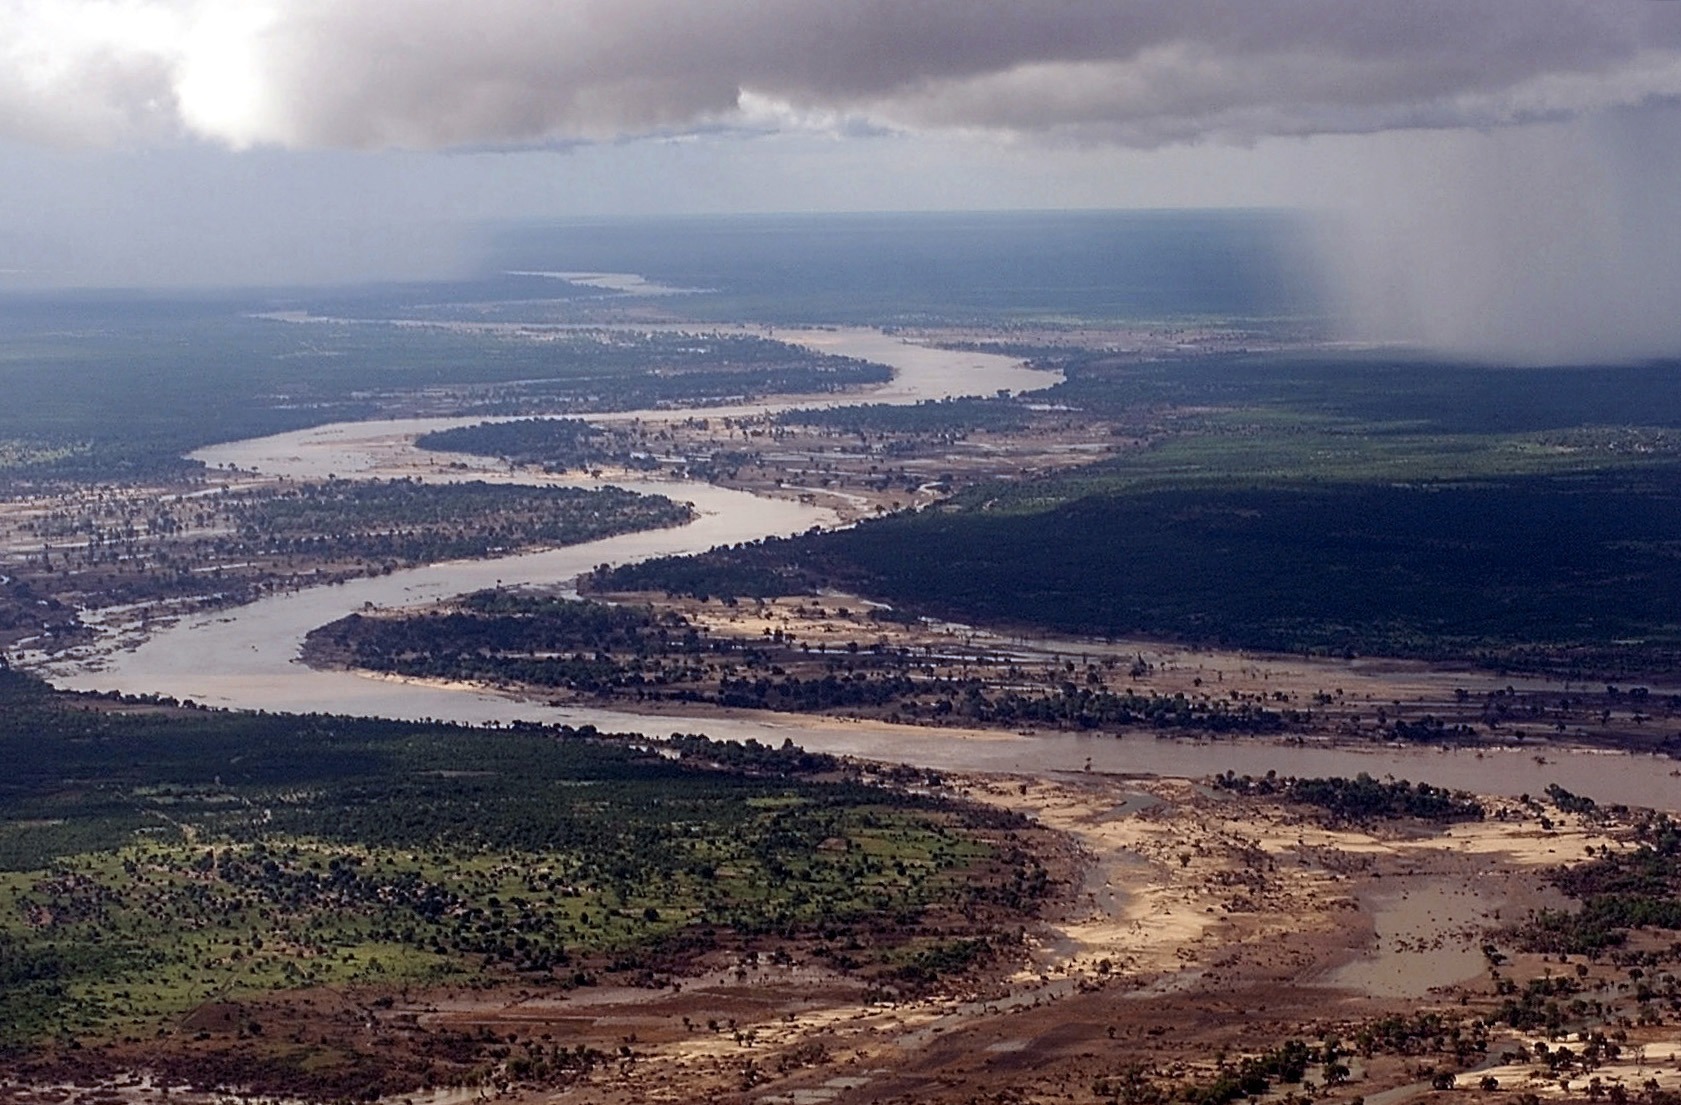 Aerial view, extreme long shot, looking down as the Limpopo River winds its way through Southern Mozambique, where it recently crested its banks and sent floodwaters rushing through towns and farmland,  forcing people from their homes and wreaking havoc with the countries infrastructure.  Even though waters have receded over the past week, heavy rains seen in the distance, continue to threaten the region with more flooding.  C-130 aircraft (not shown), assigned to the 37th Airlift Squadron at Ramstein Air Base, Germany, fly daily Keen Sage aerial surveillance missions  over Mozambique to help find stranded flood victims and survey flood levels and damage caused by the flooding in Southern Africa.  The 37th Airlift Squadron C-130 aircraft, are deployed to Hoedspruit Air Force Base, South Africa, as part of the United States Operation Atlas Response, humanitarian relief efforts.